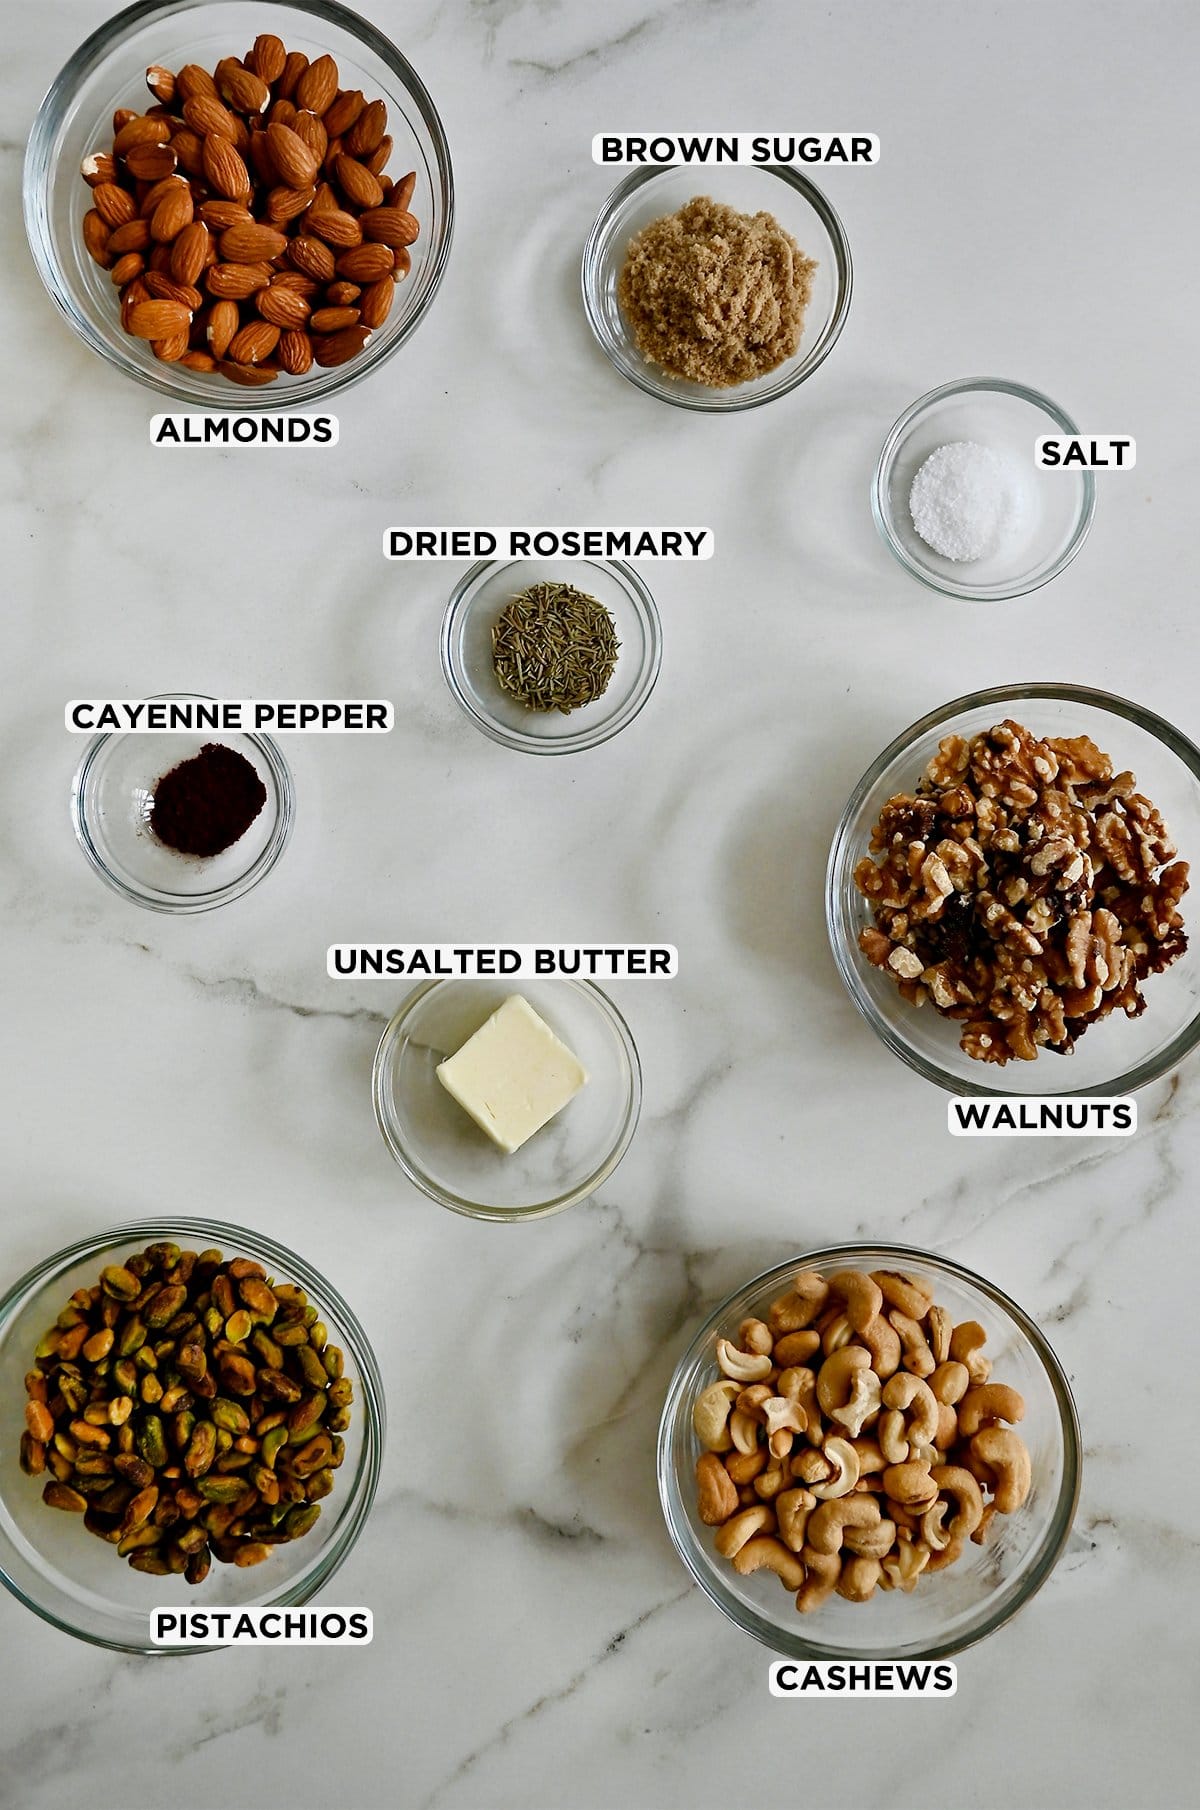 Small glass bowls containing cashews, pistachios, almonds, walnuts, butter, dried rosemary, cayenne pepper, salt and brown sugar on a marble countertop.